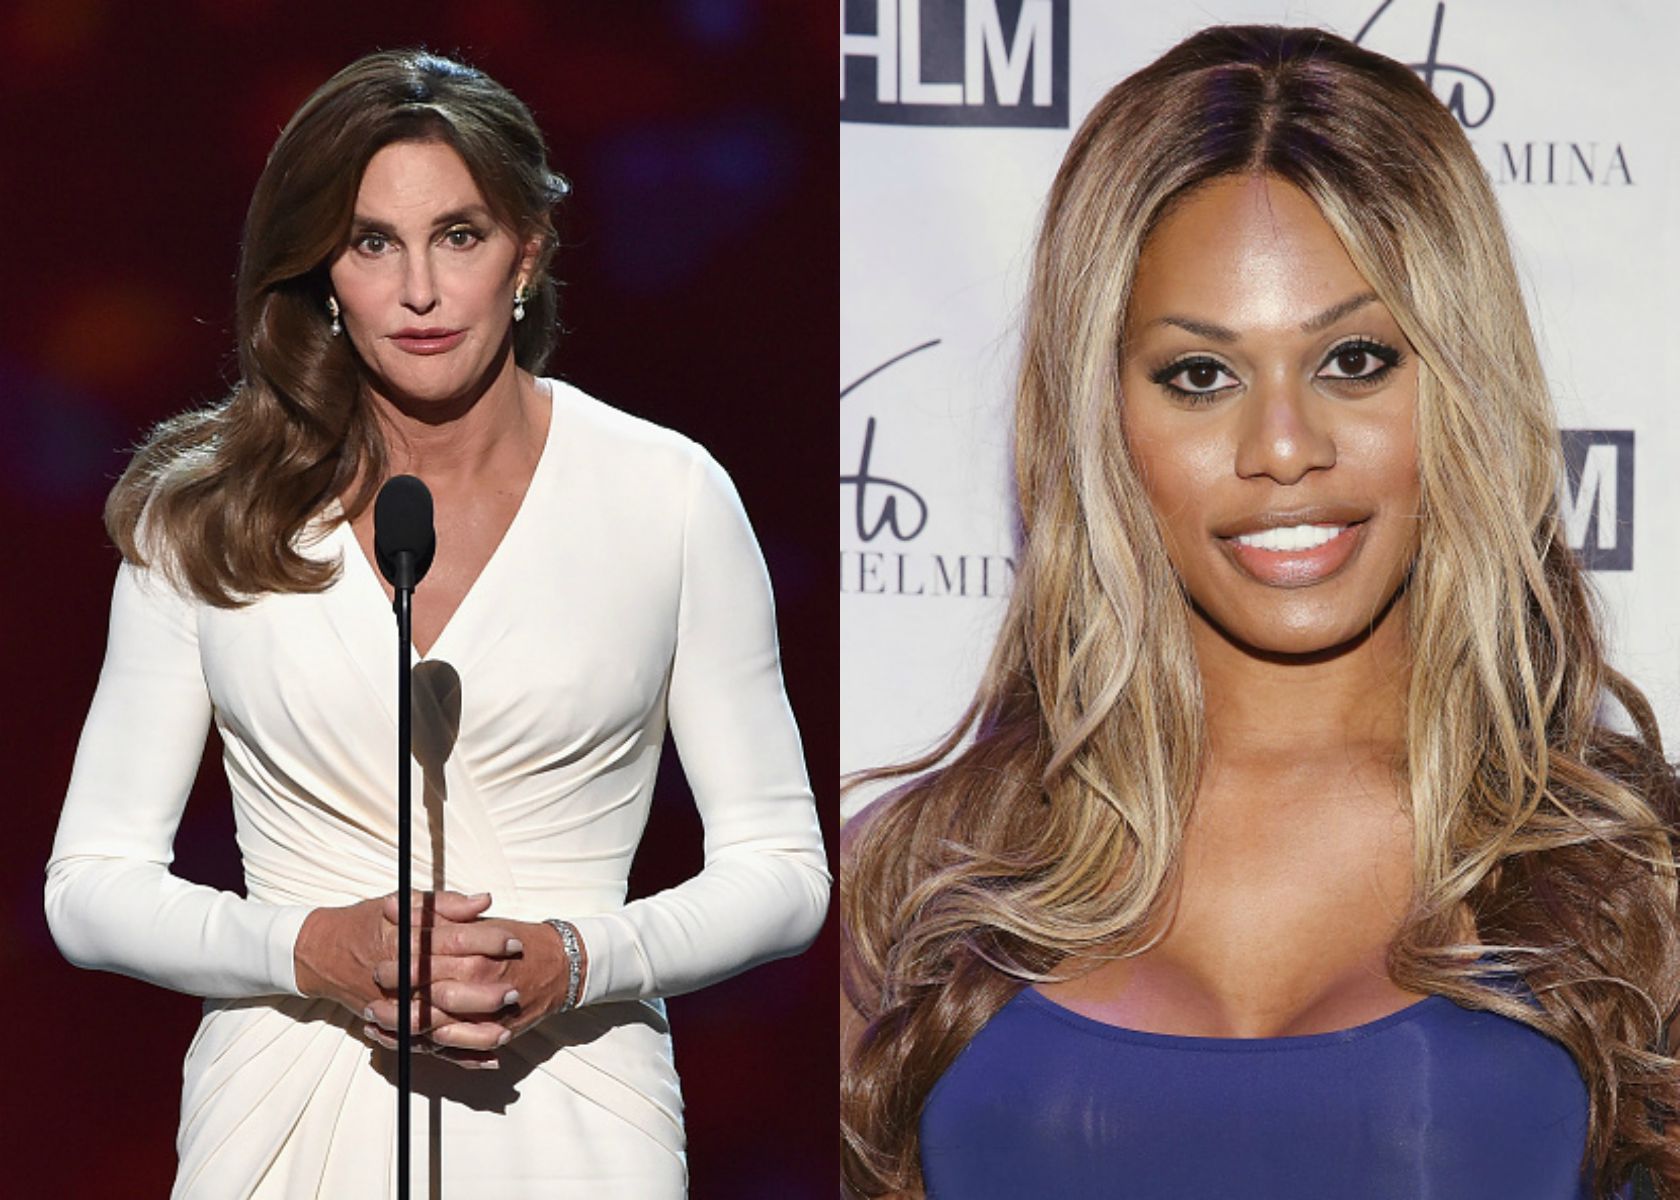 Why Laverne Cox doesn't want Caitlyn Jenner-style surgery